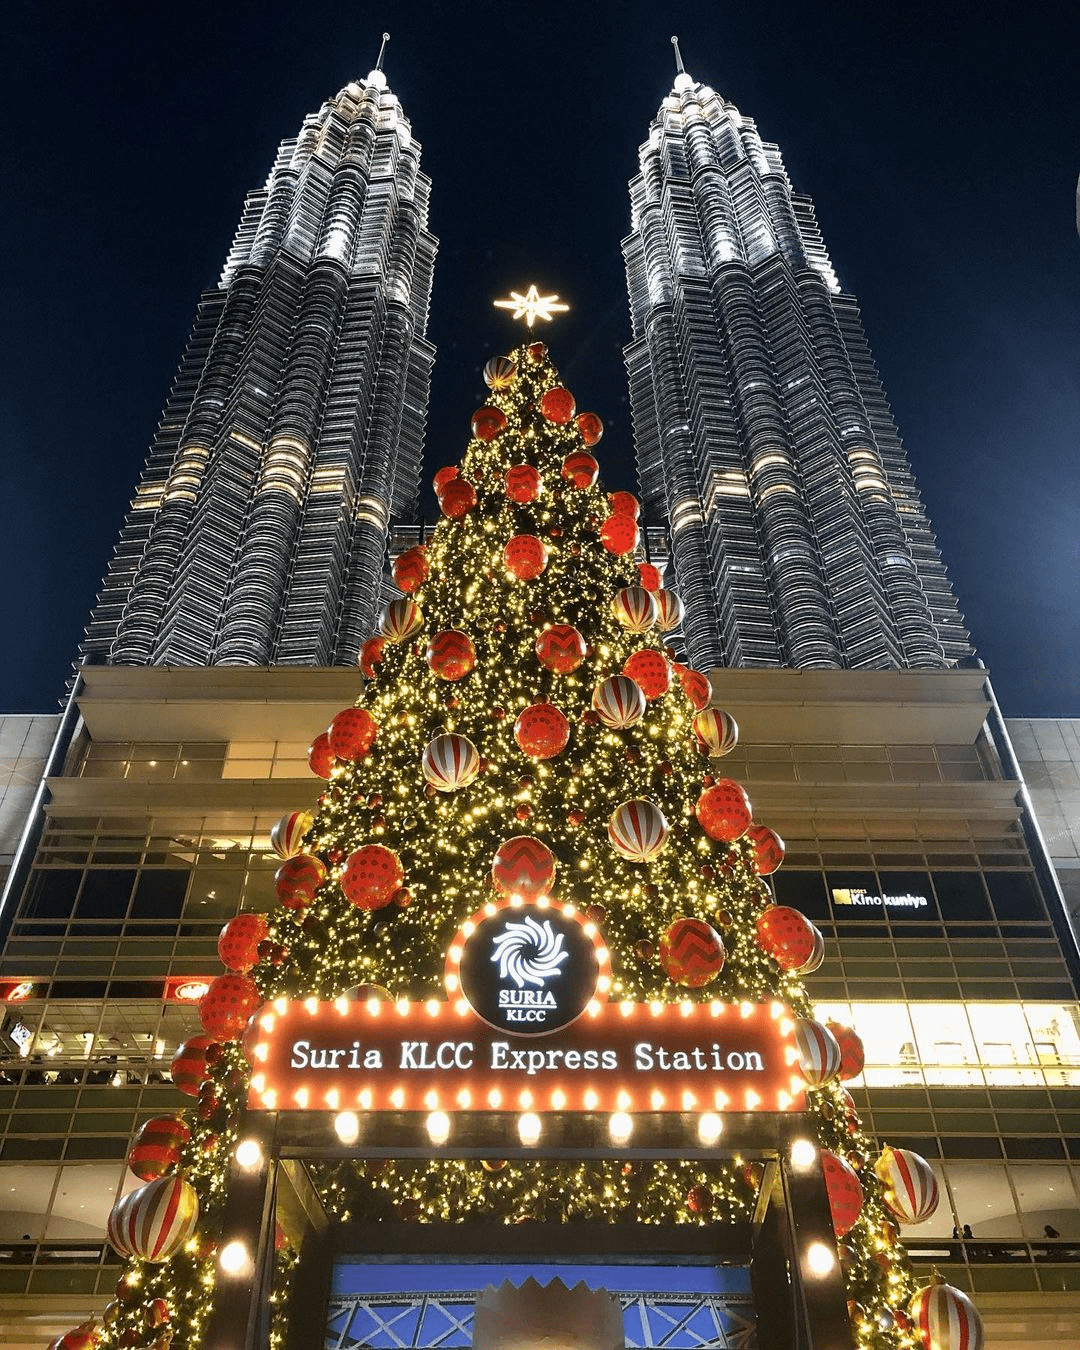 Things to do in December 2021 - Suria KLCC